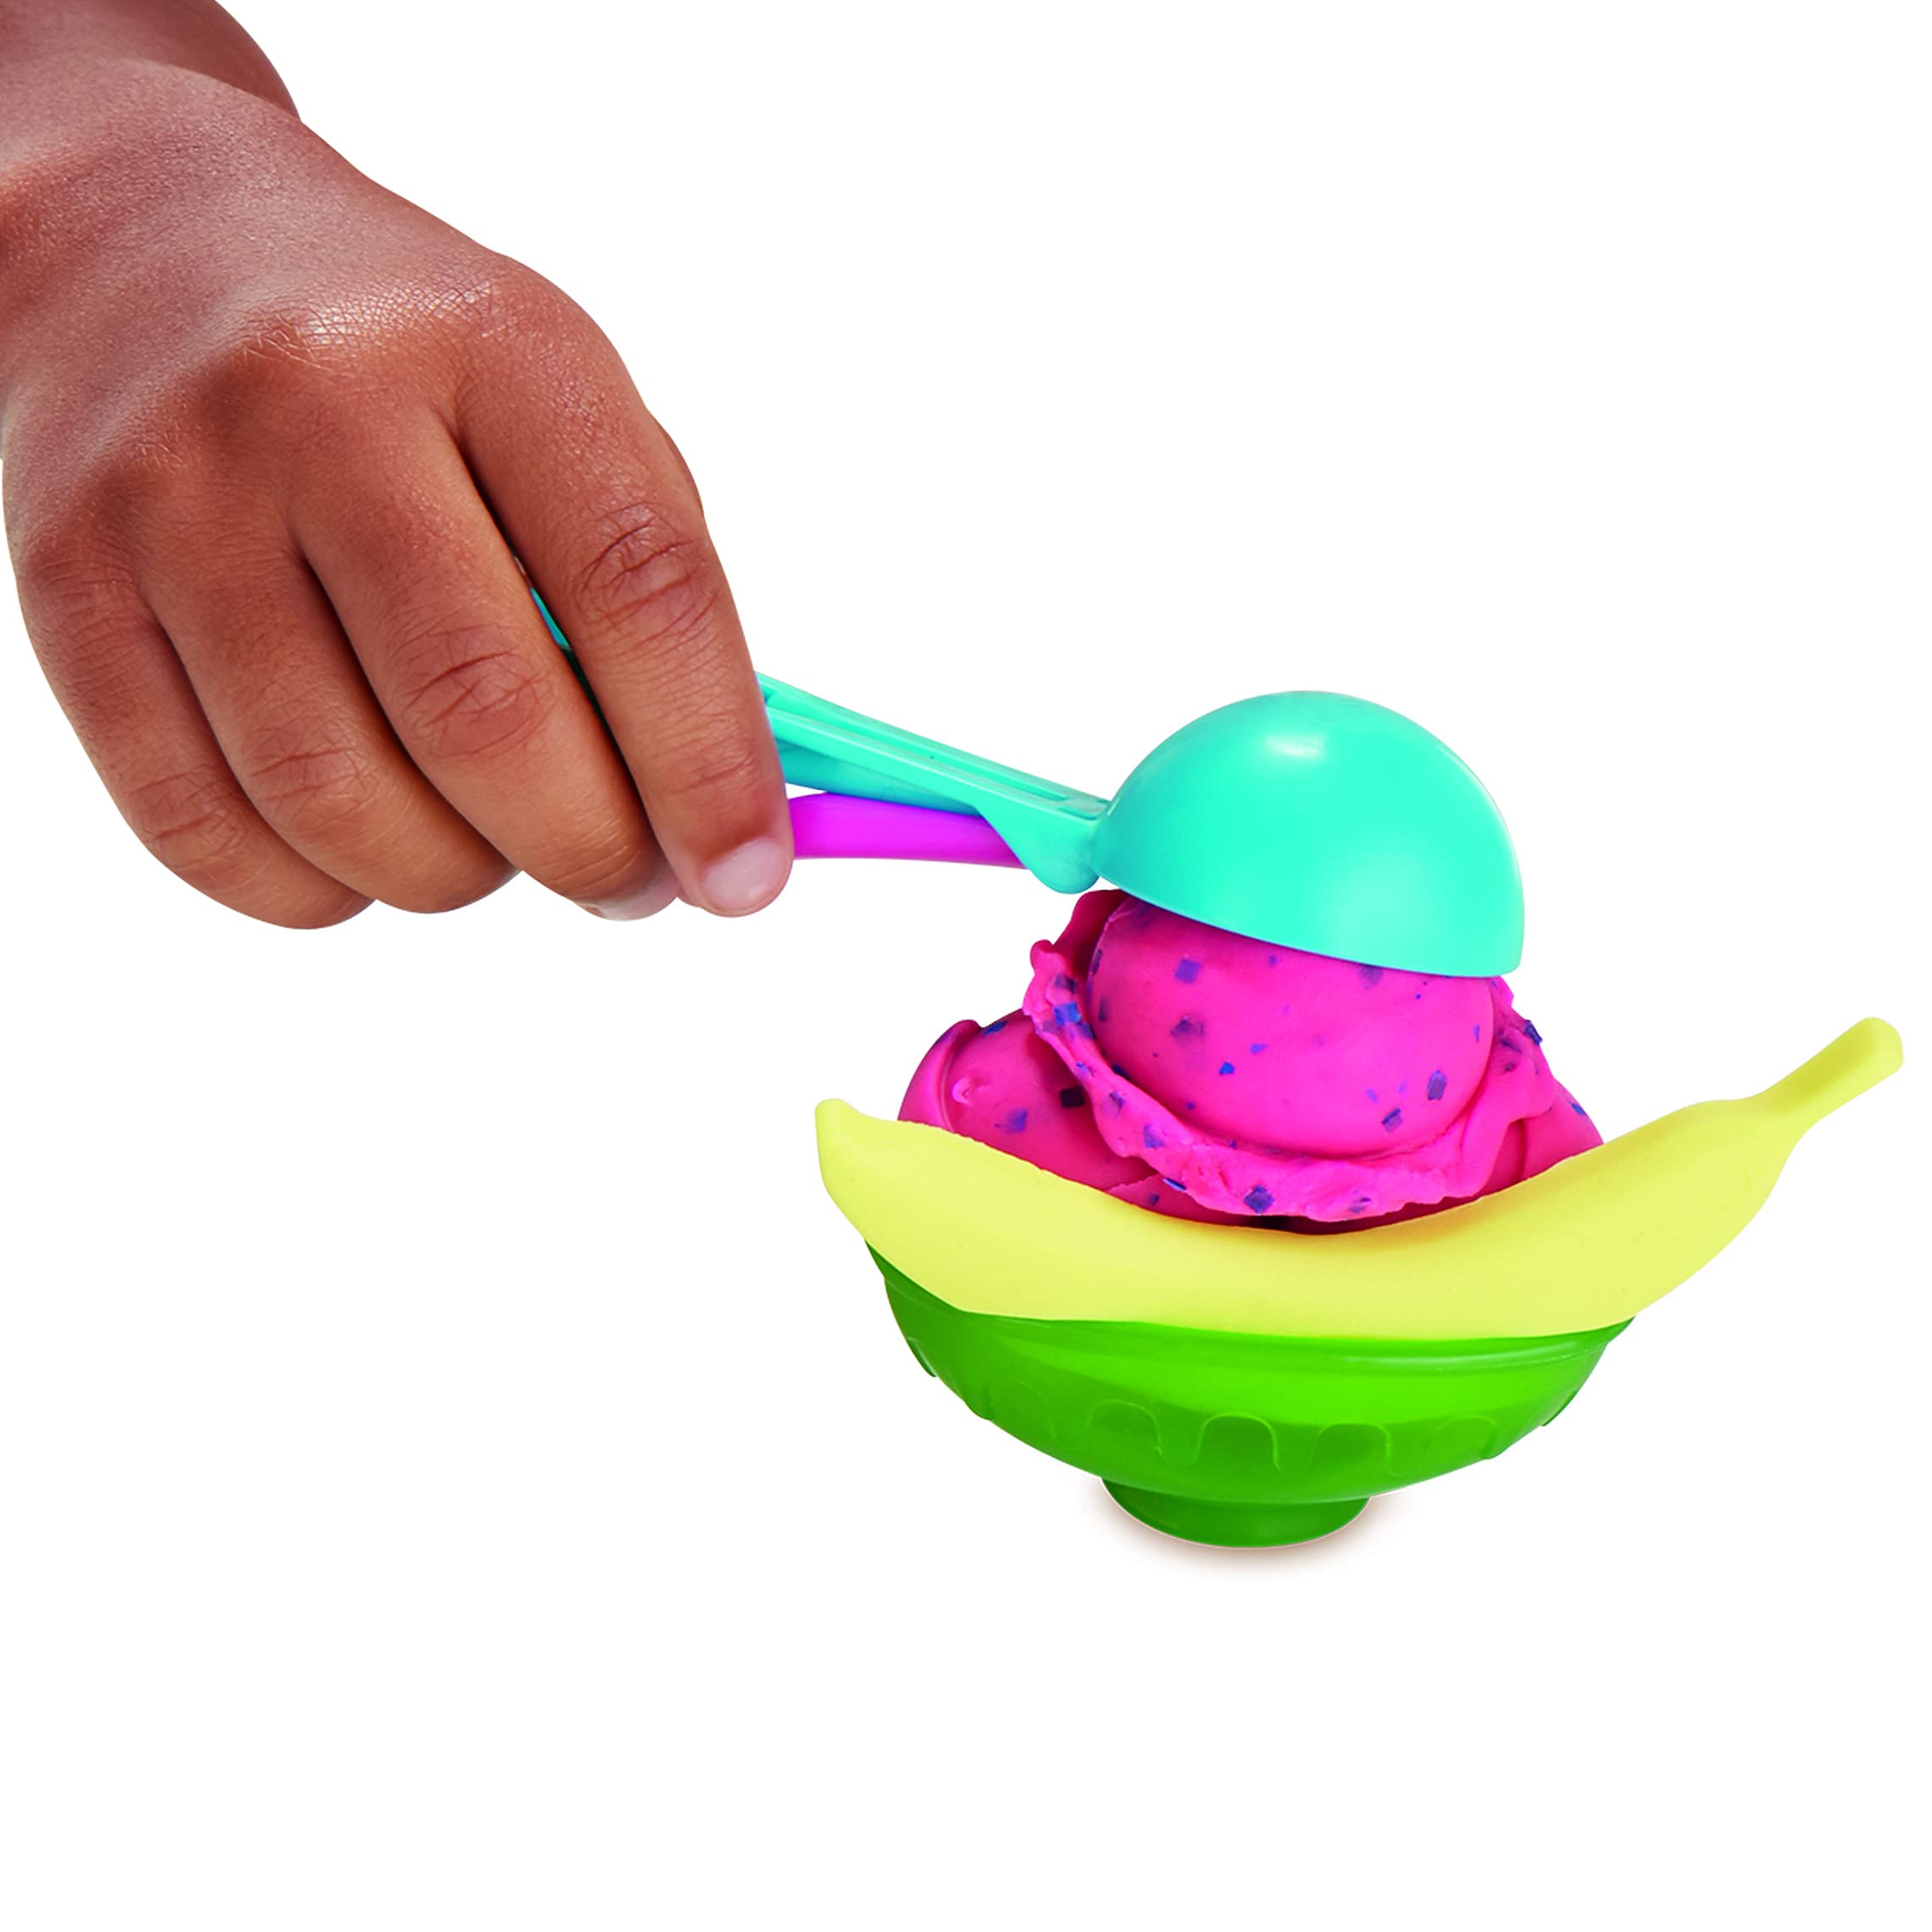 Play-Doh Kitchen Creations Ice Cream Party Play Food Set with 6 Non-Toxic Colors, 2 Oz Cans (Amazon Exclusive)